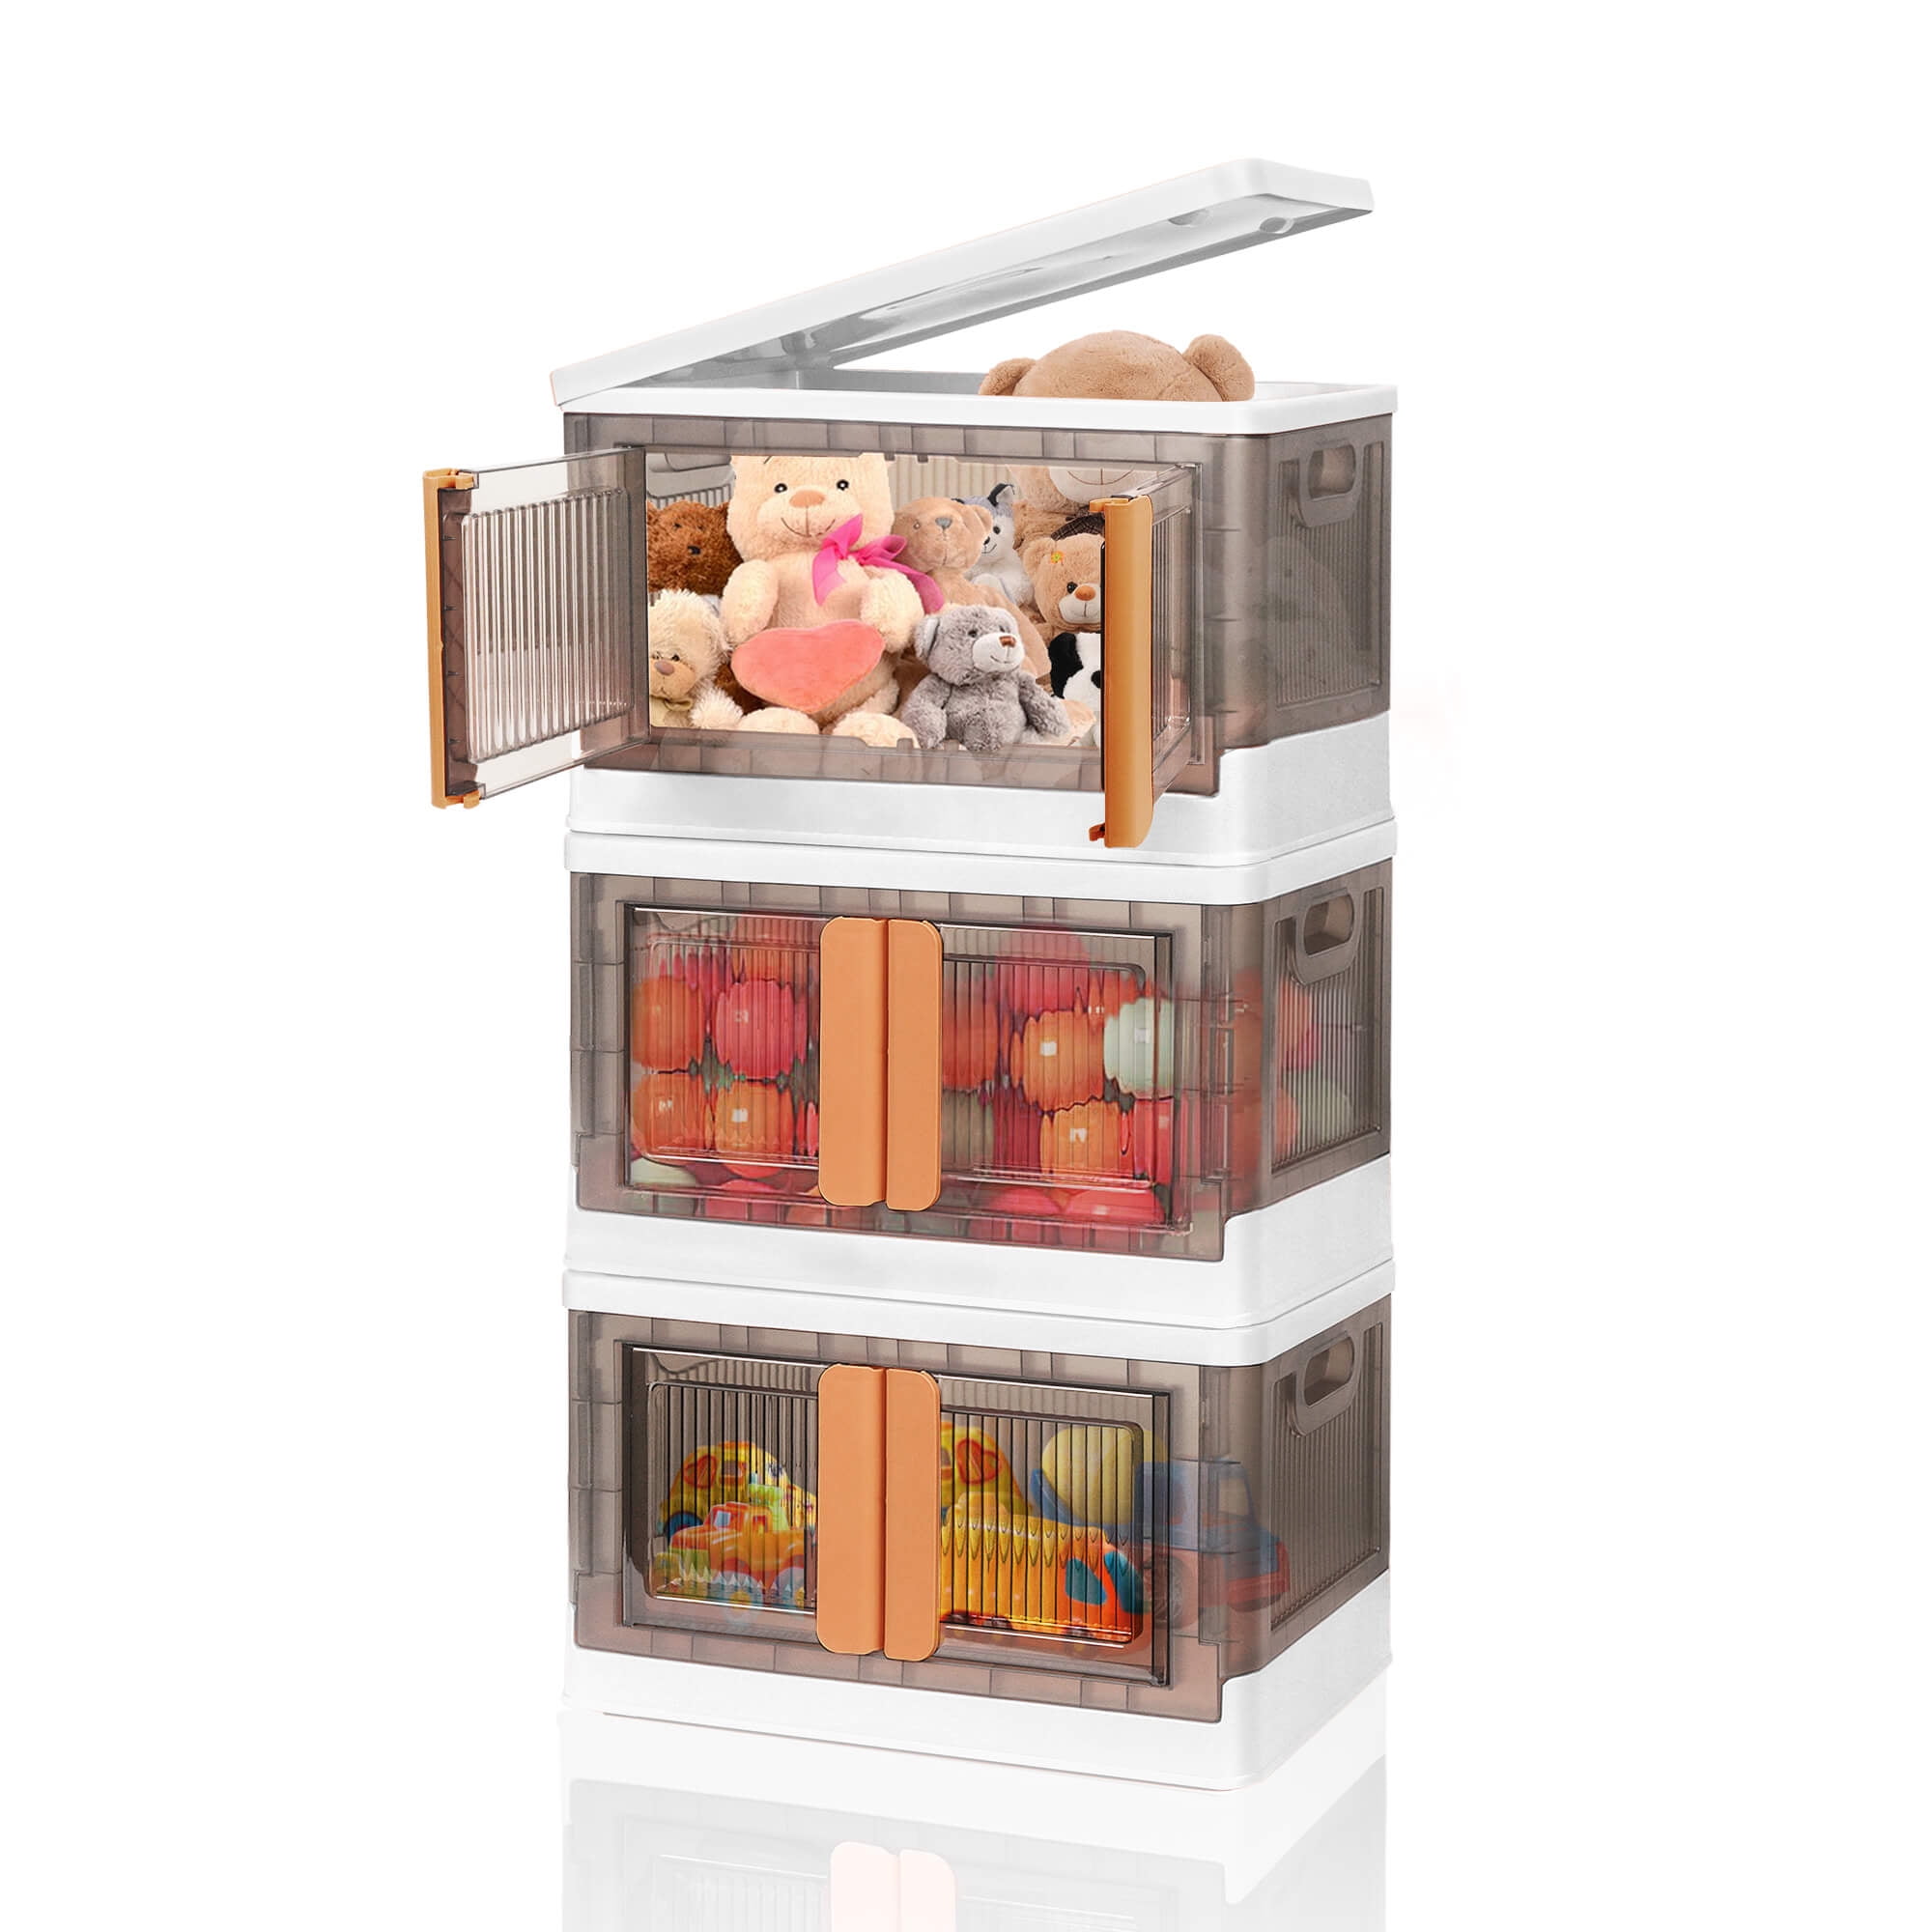 Stackable Plastic Closet Organizers and Storage Bins with Lids